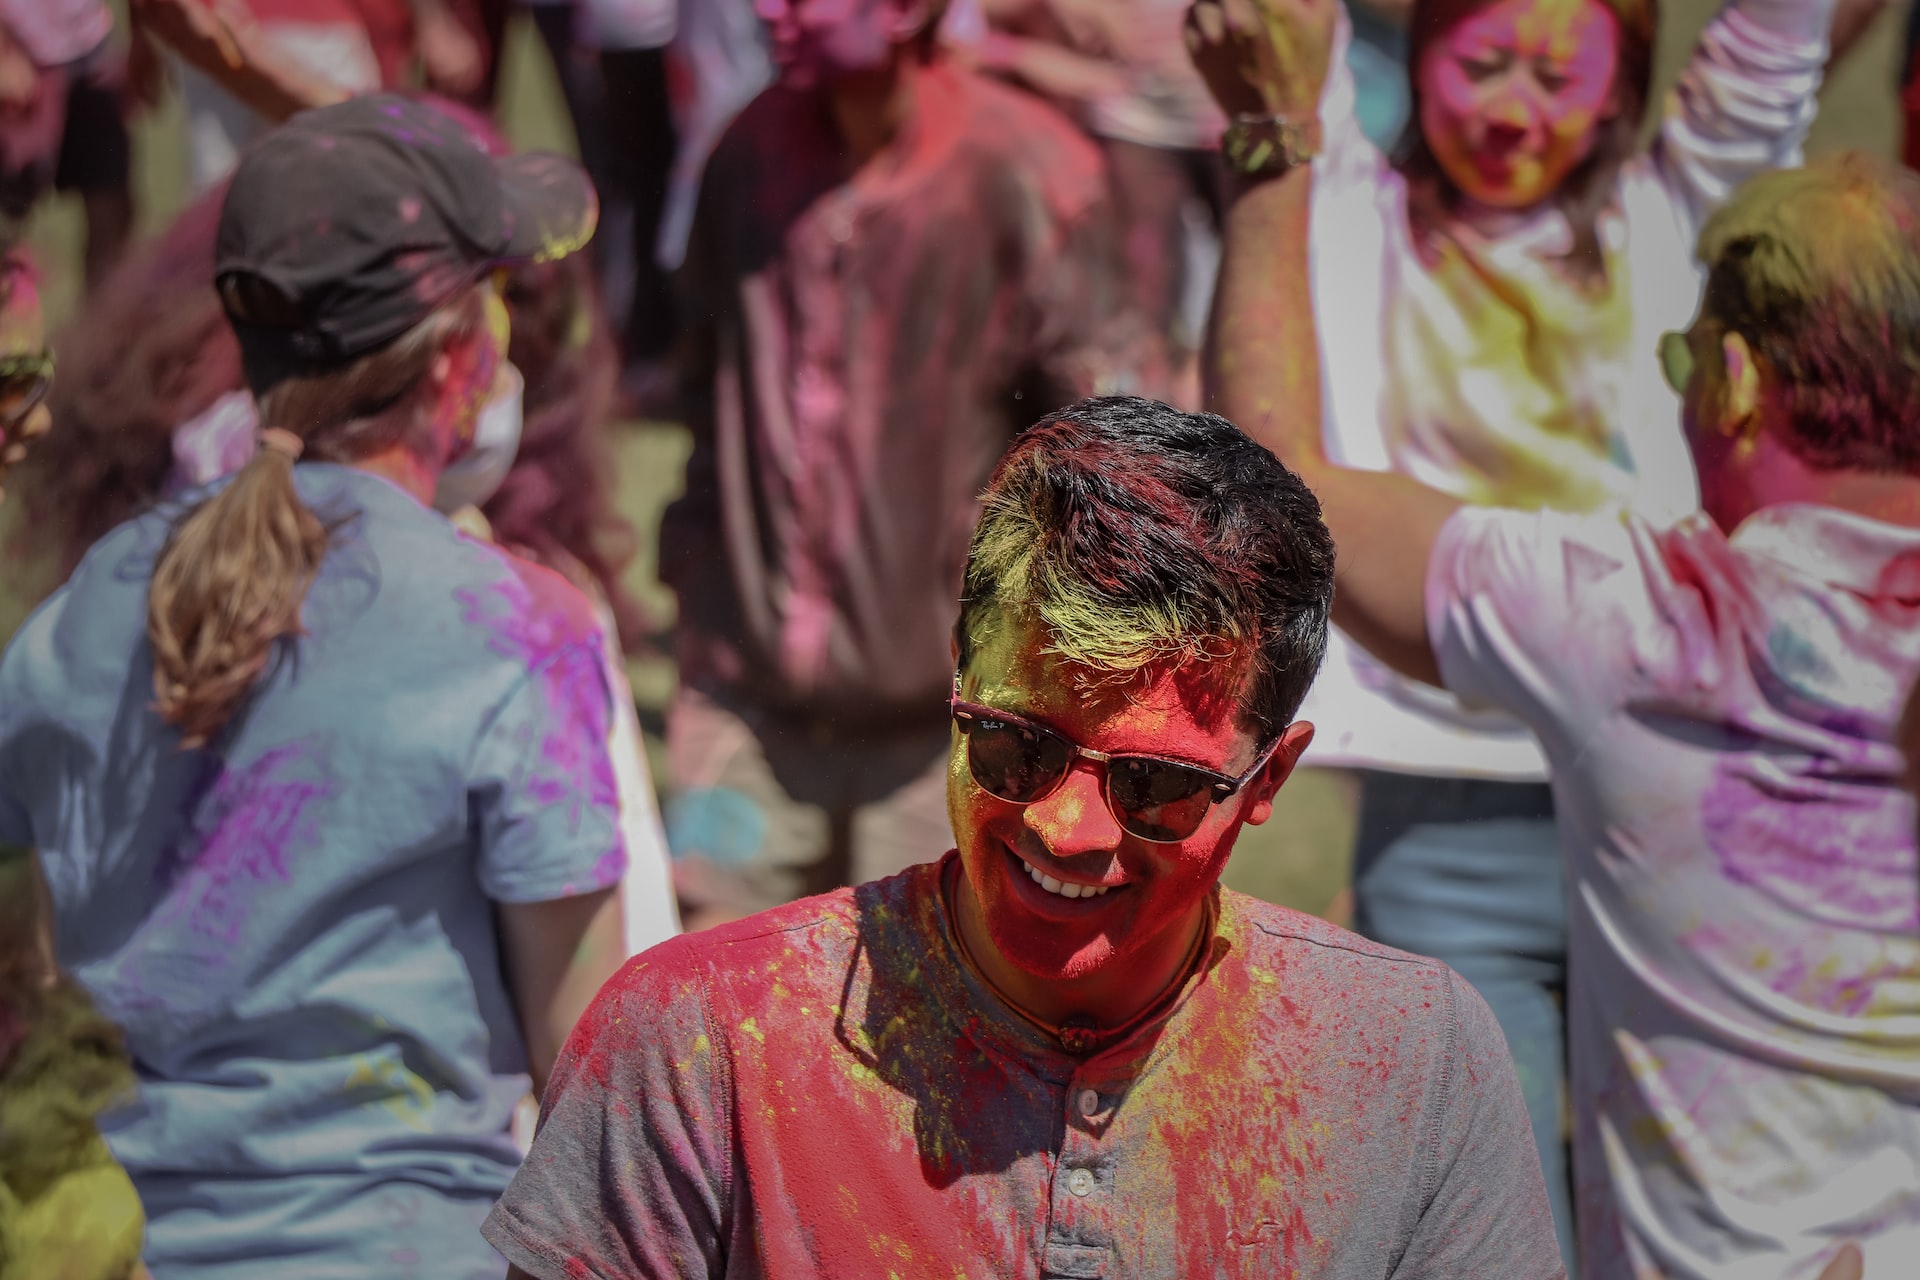 People covered in colorful powder.